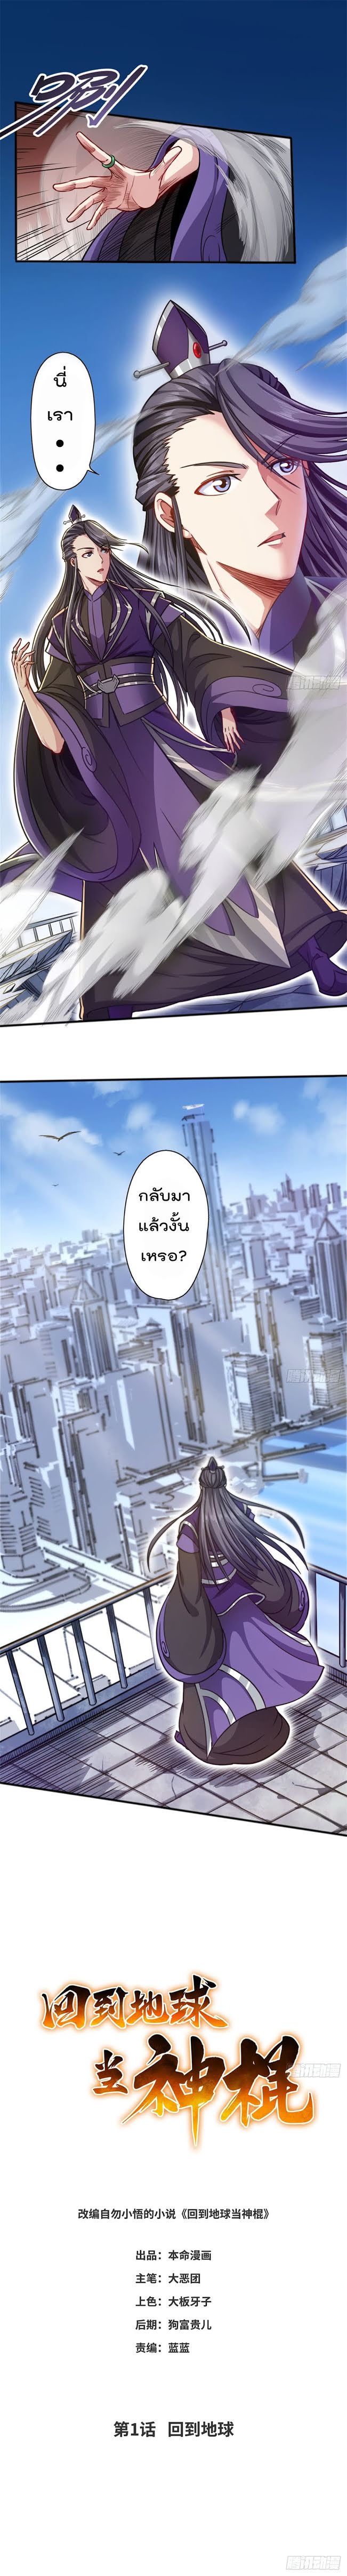 The God Cultivators Return in The City - หน้า 3